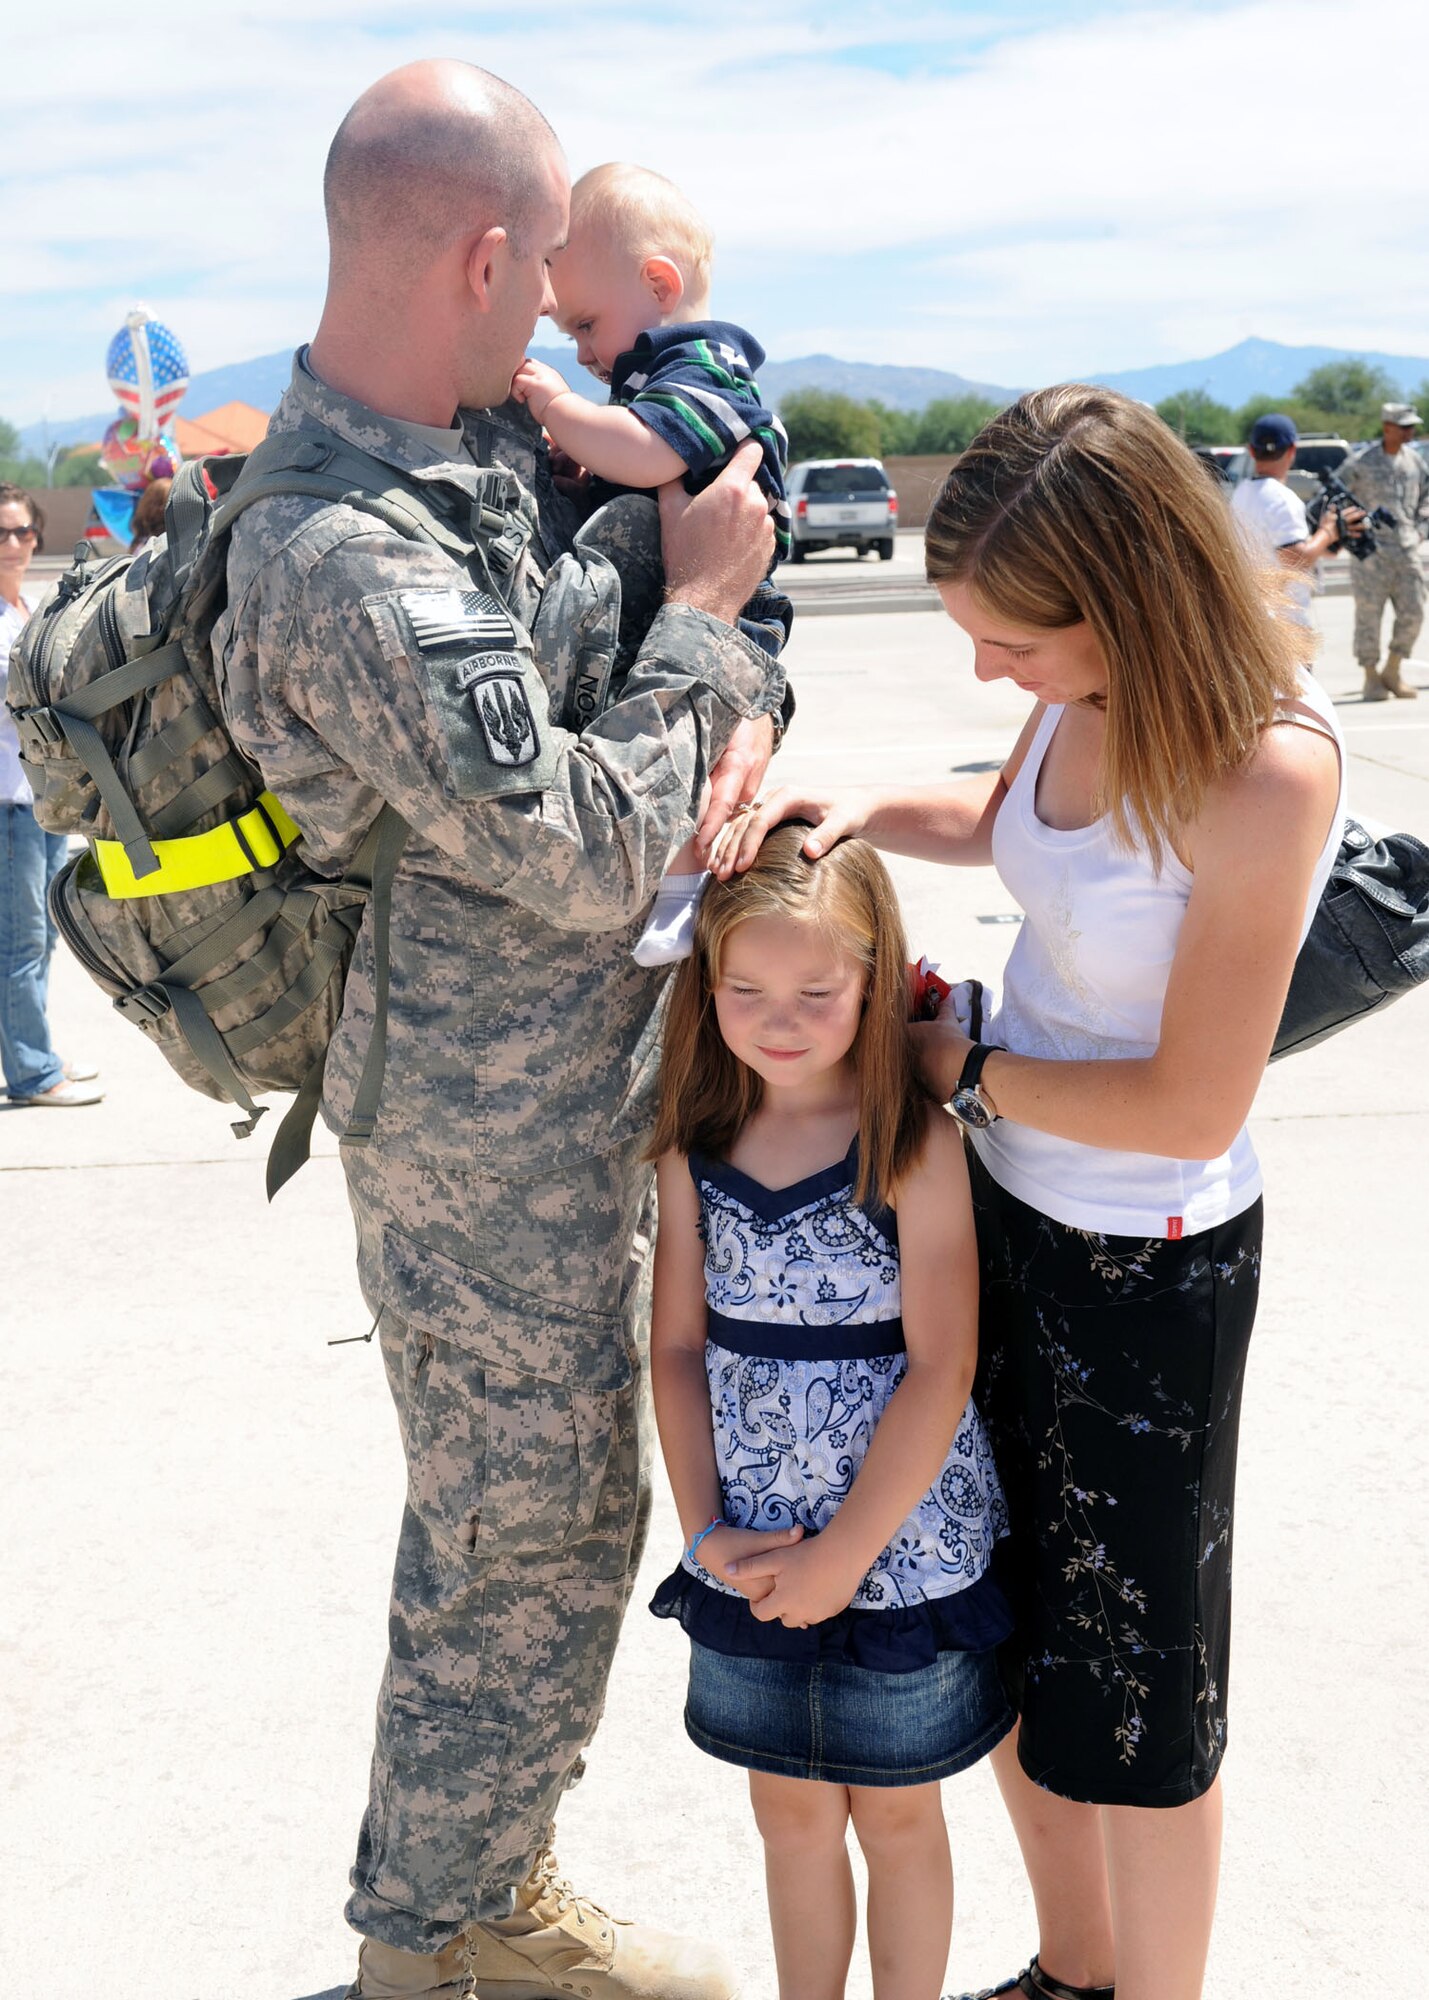 Sgt. 1st Class Robert Wilson reunites with his wife Sandra, daughter
Lea, and son Braydon after returning from a 365-day deployment. (U.S. Air Force photo/Senior Airman Brittany Dowdle)